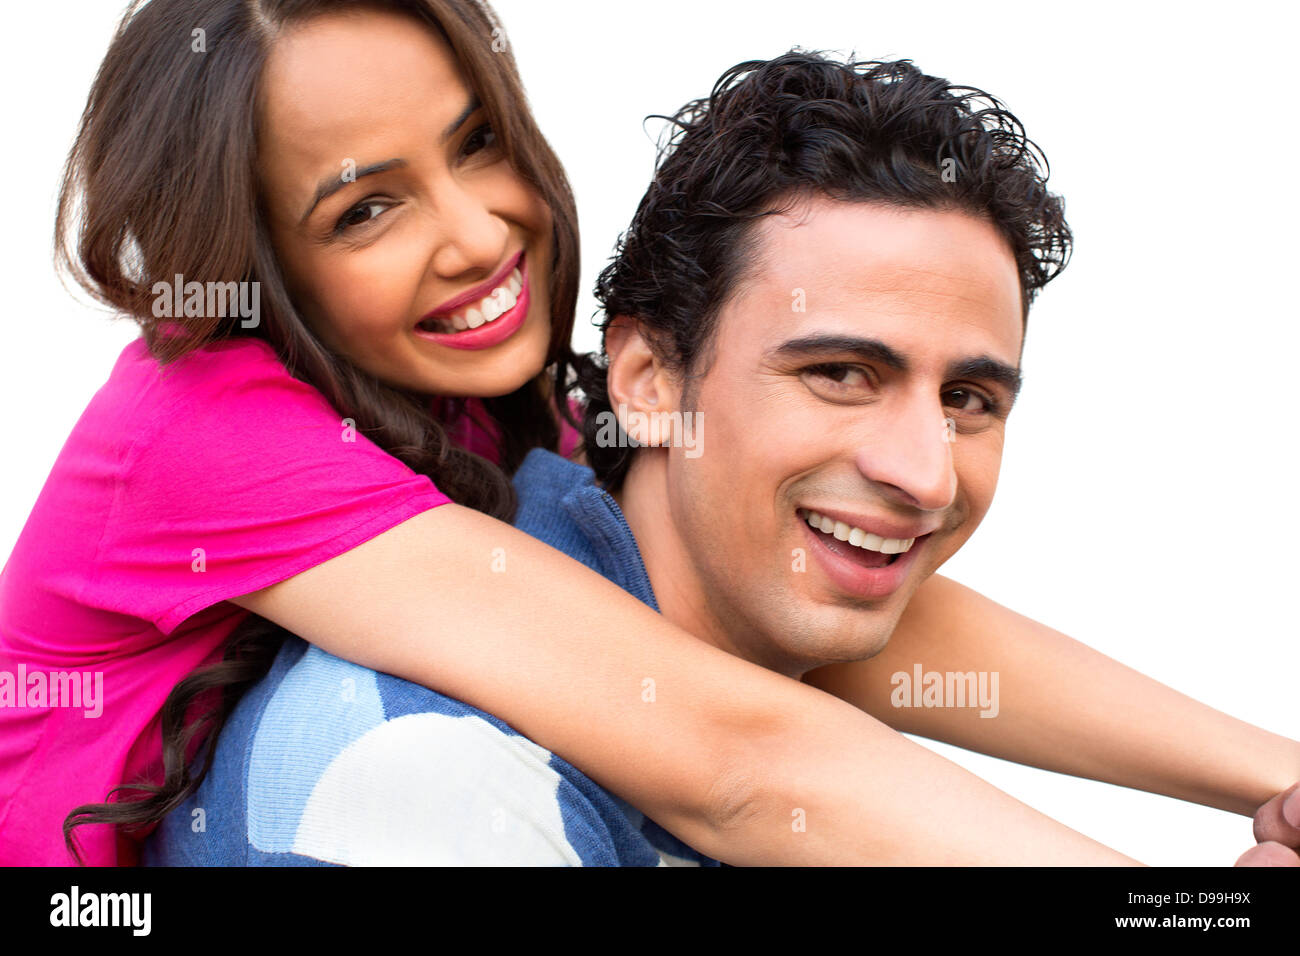 Portrait of a smiling couple in love Stock Photo